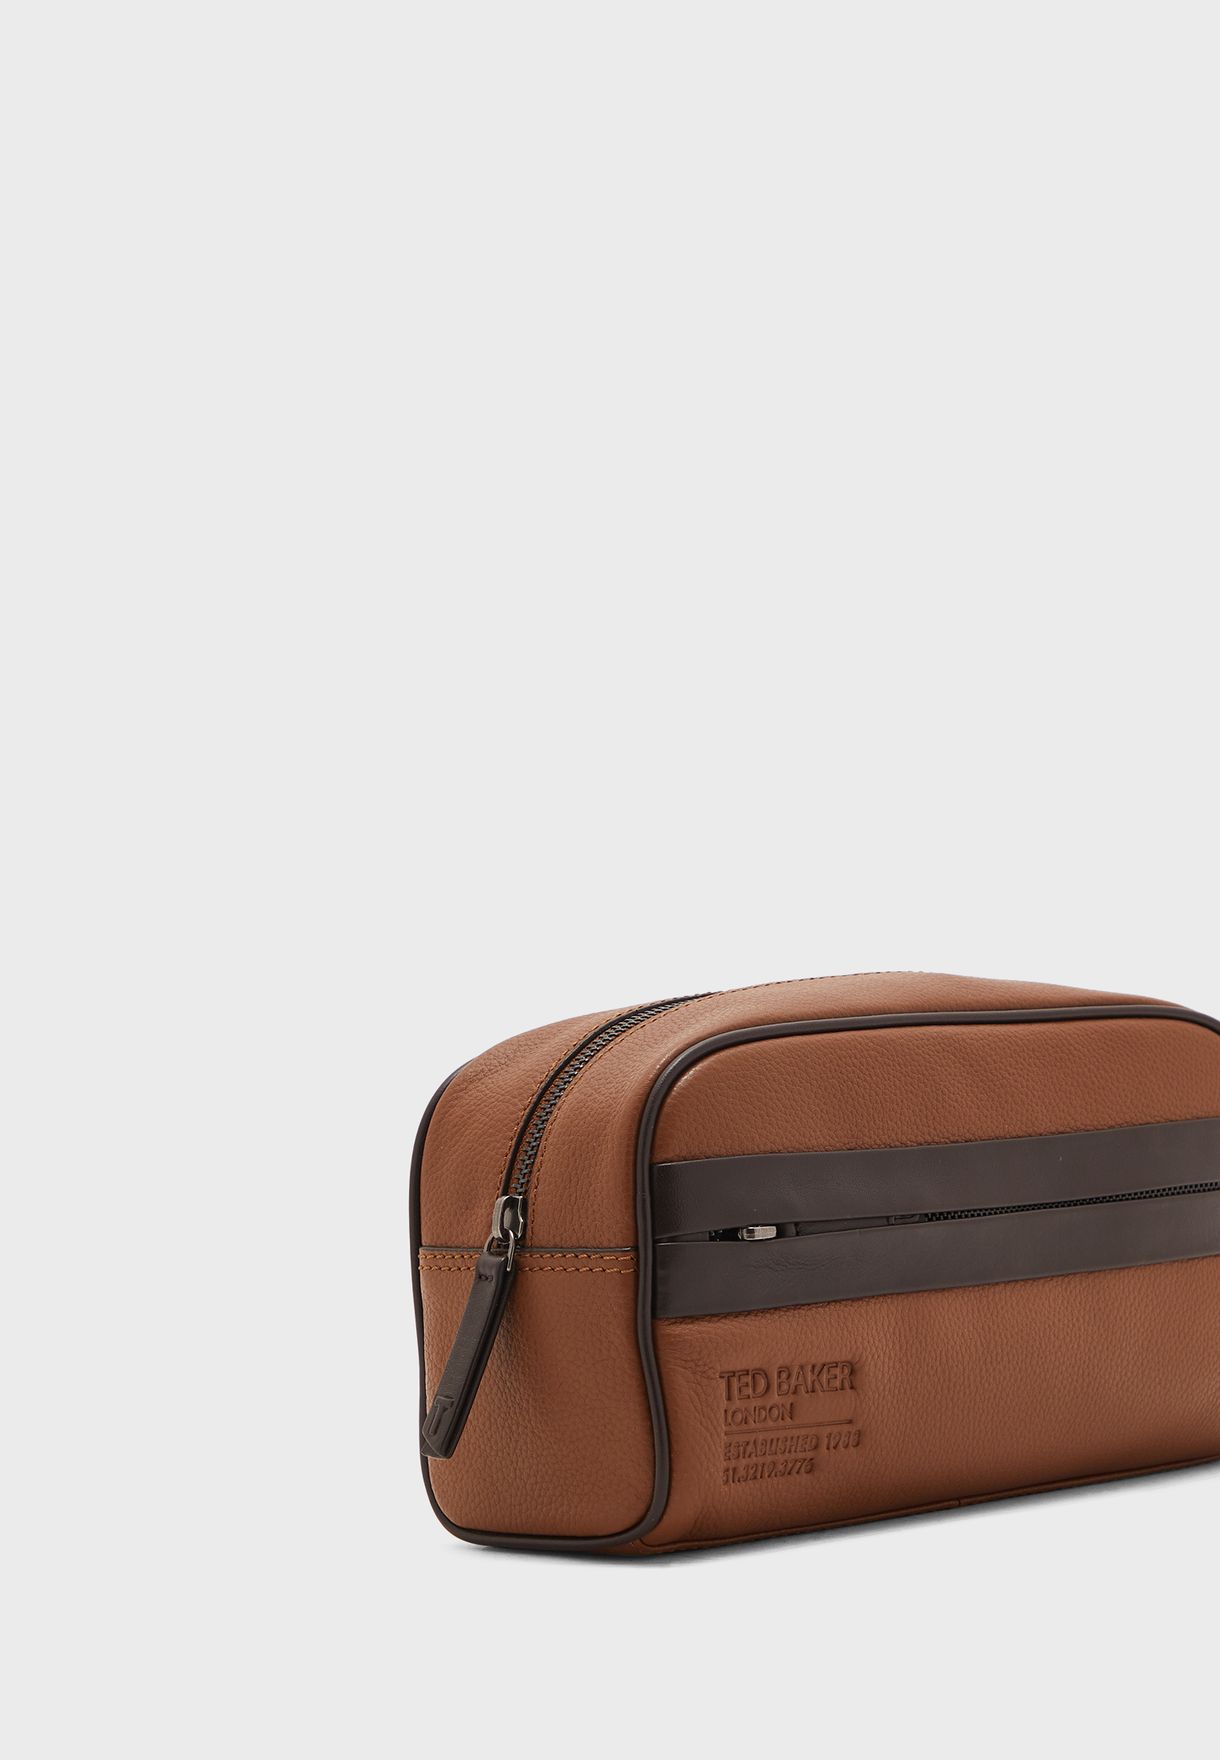 Paty Ted Branded Leather Washbag